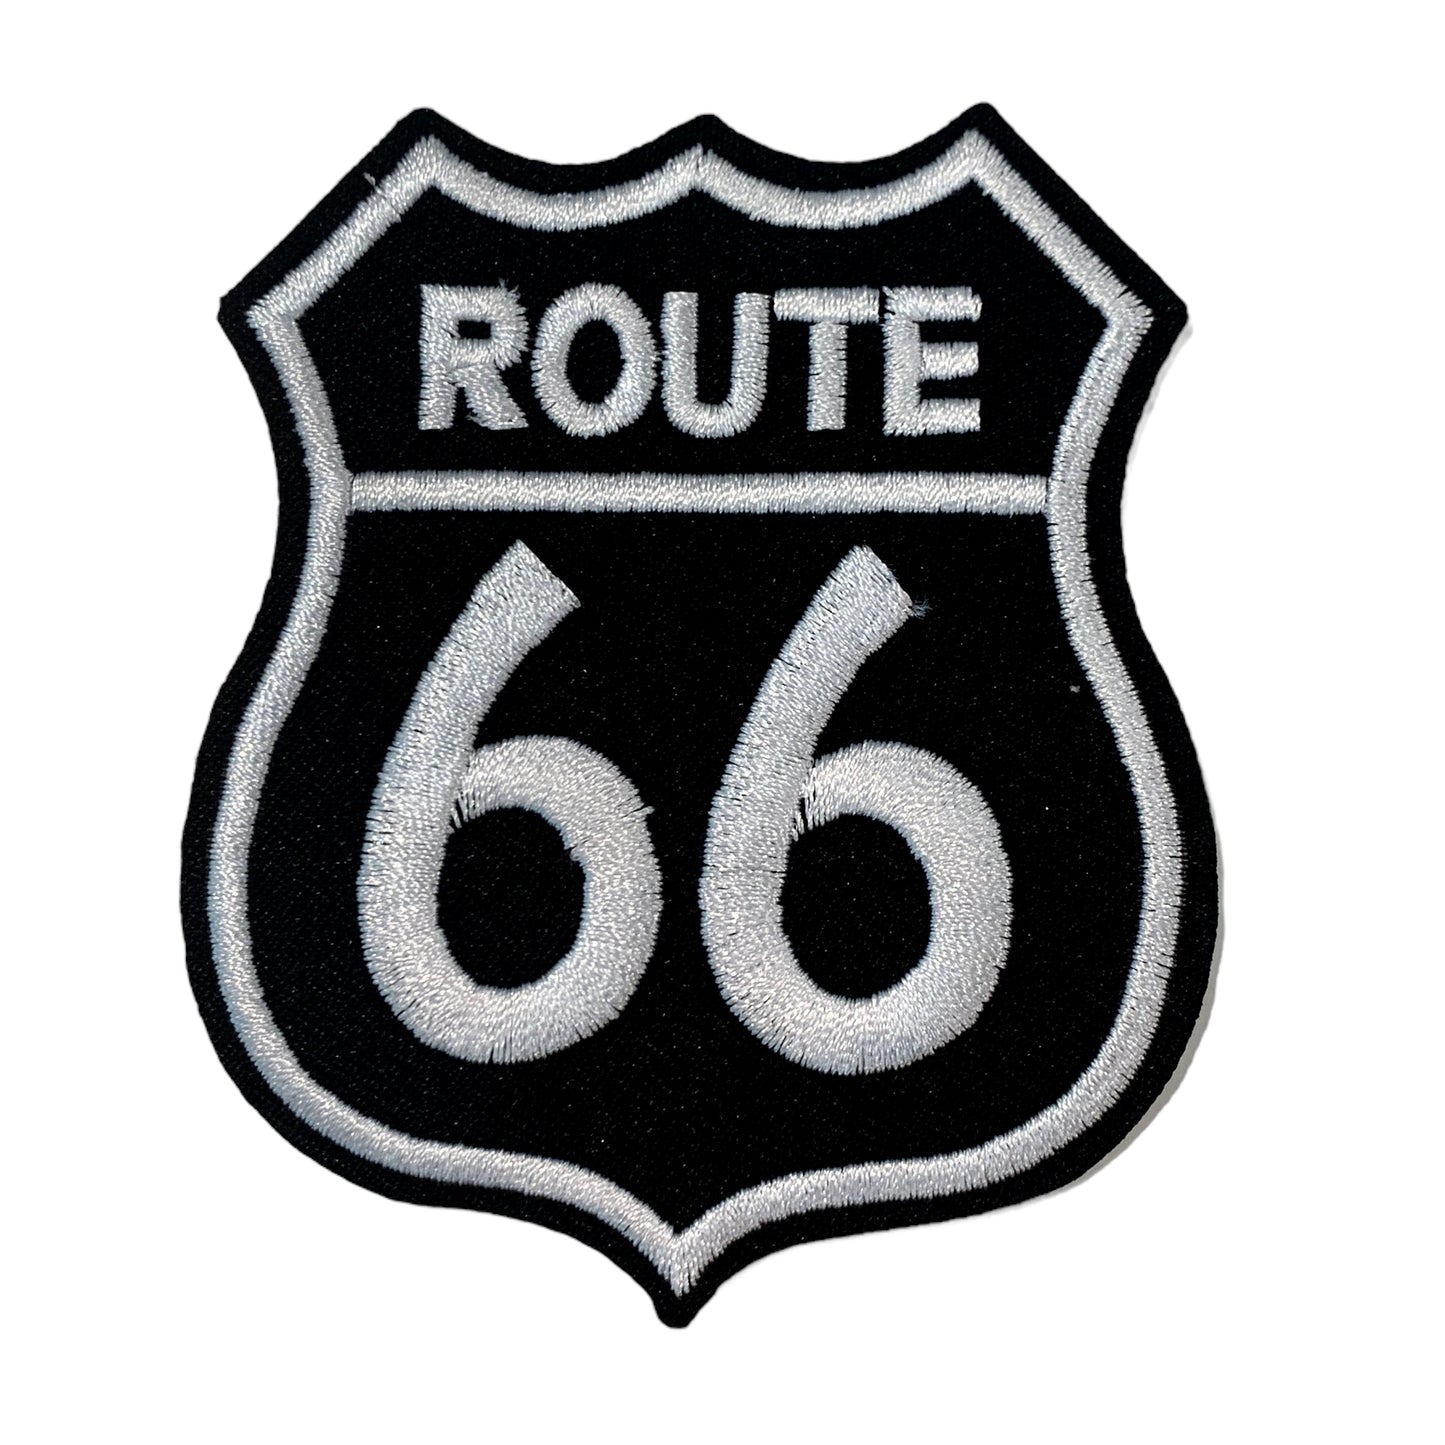 ROUTE 66 Patch